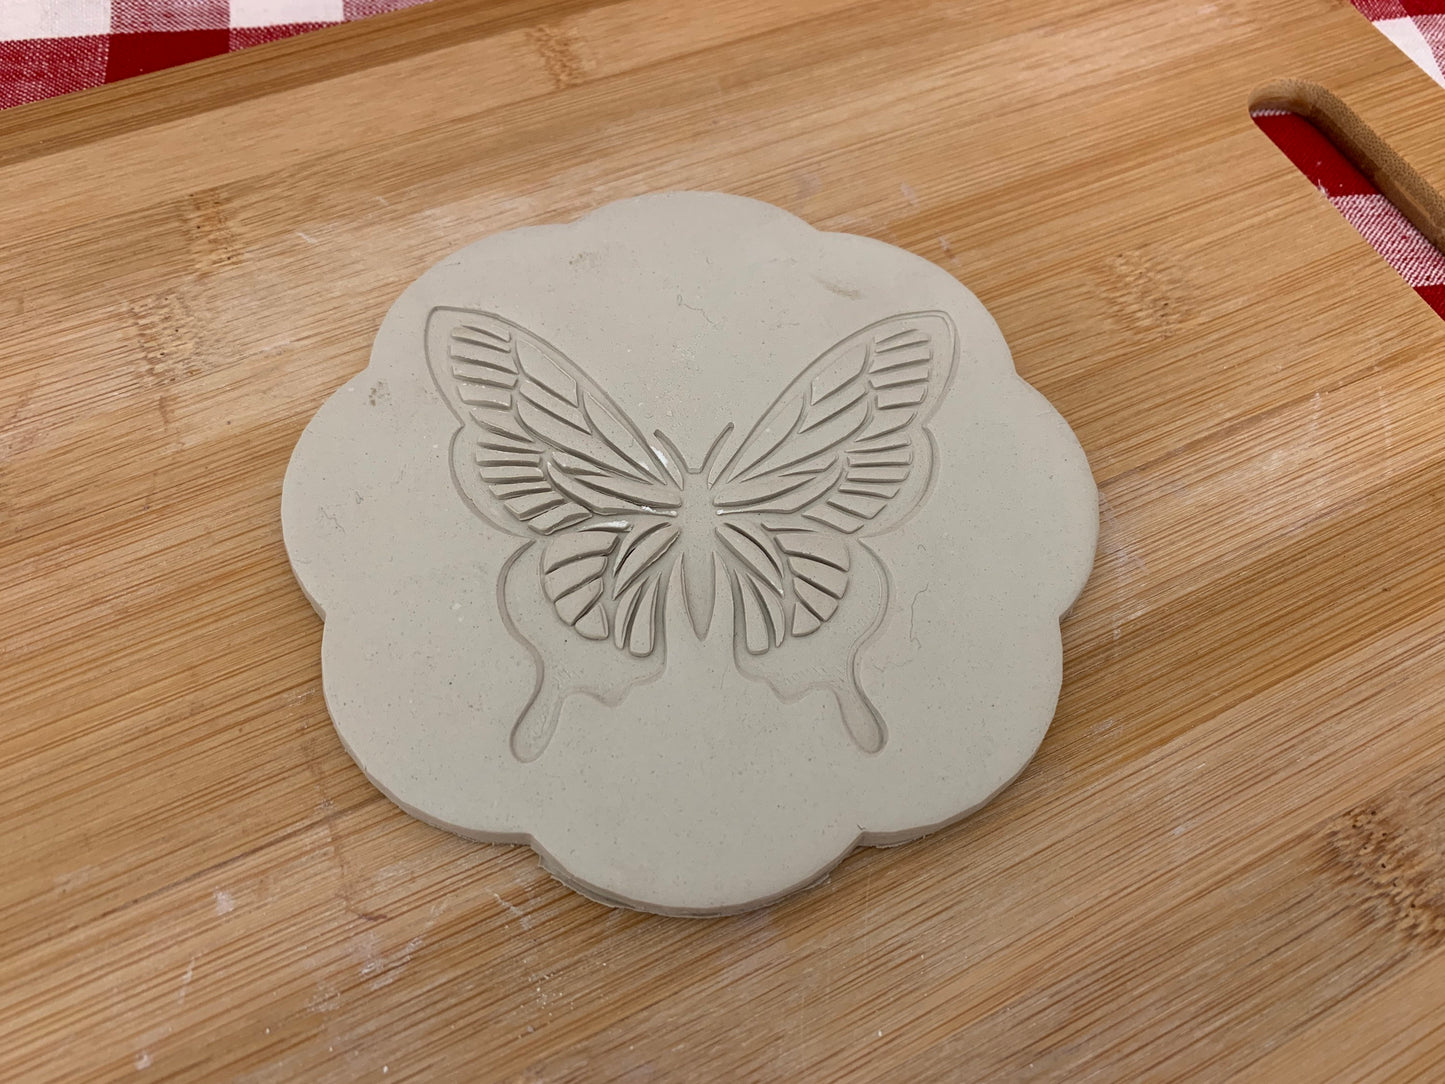 Butterfly design, Pottery stamp or Stencil w/ optional cutter, pottery tool - multiple sizes